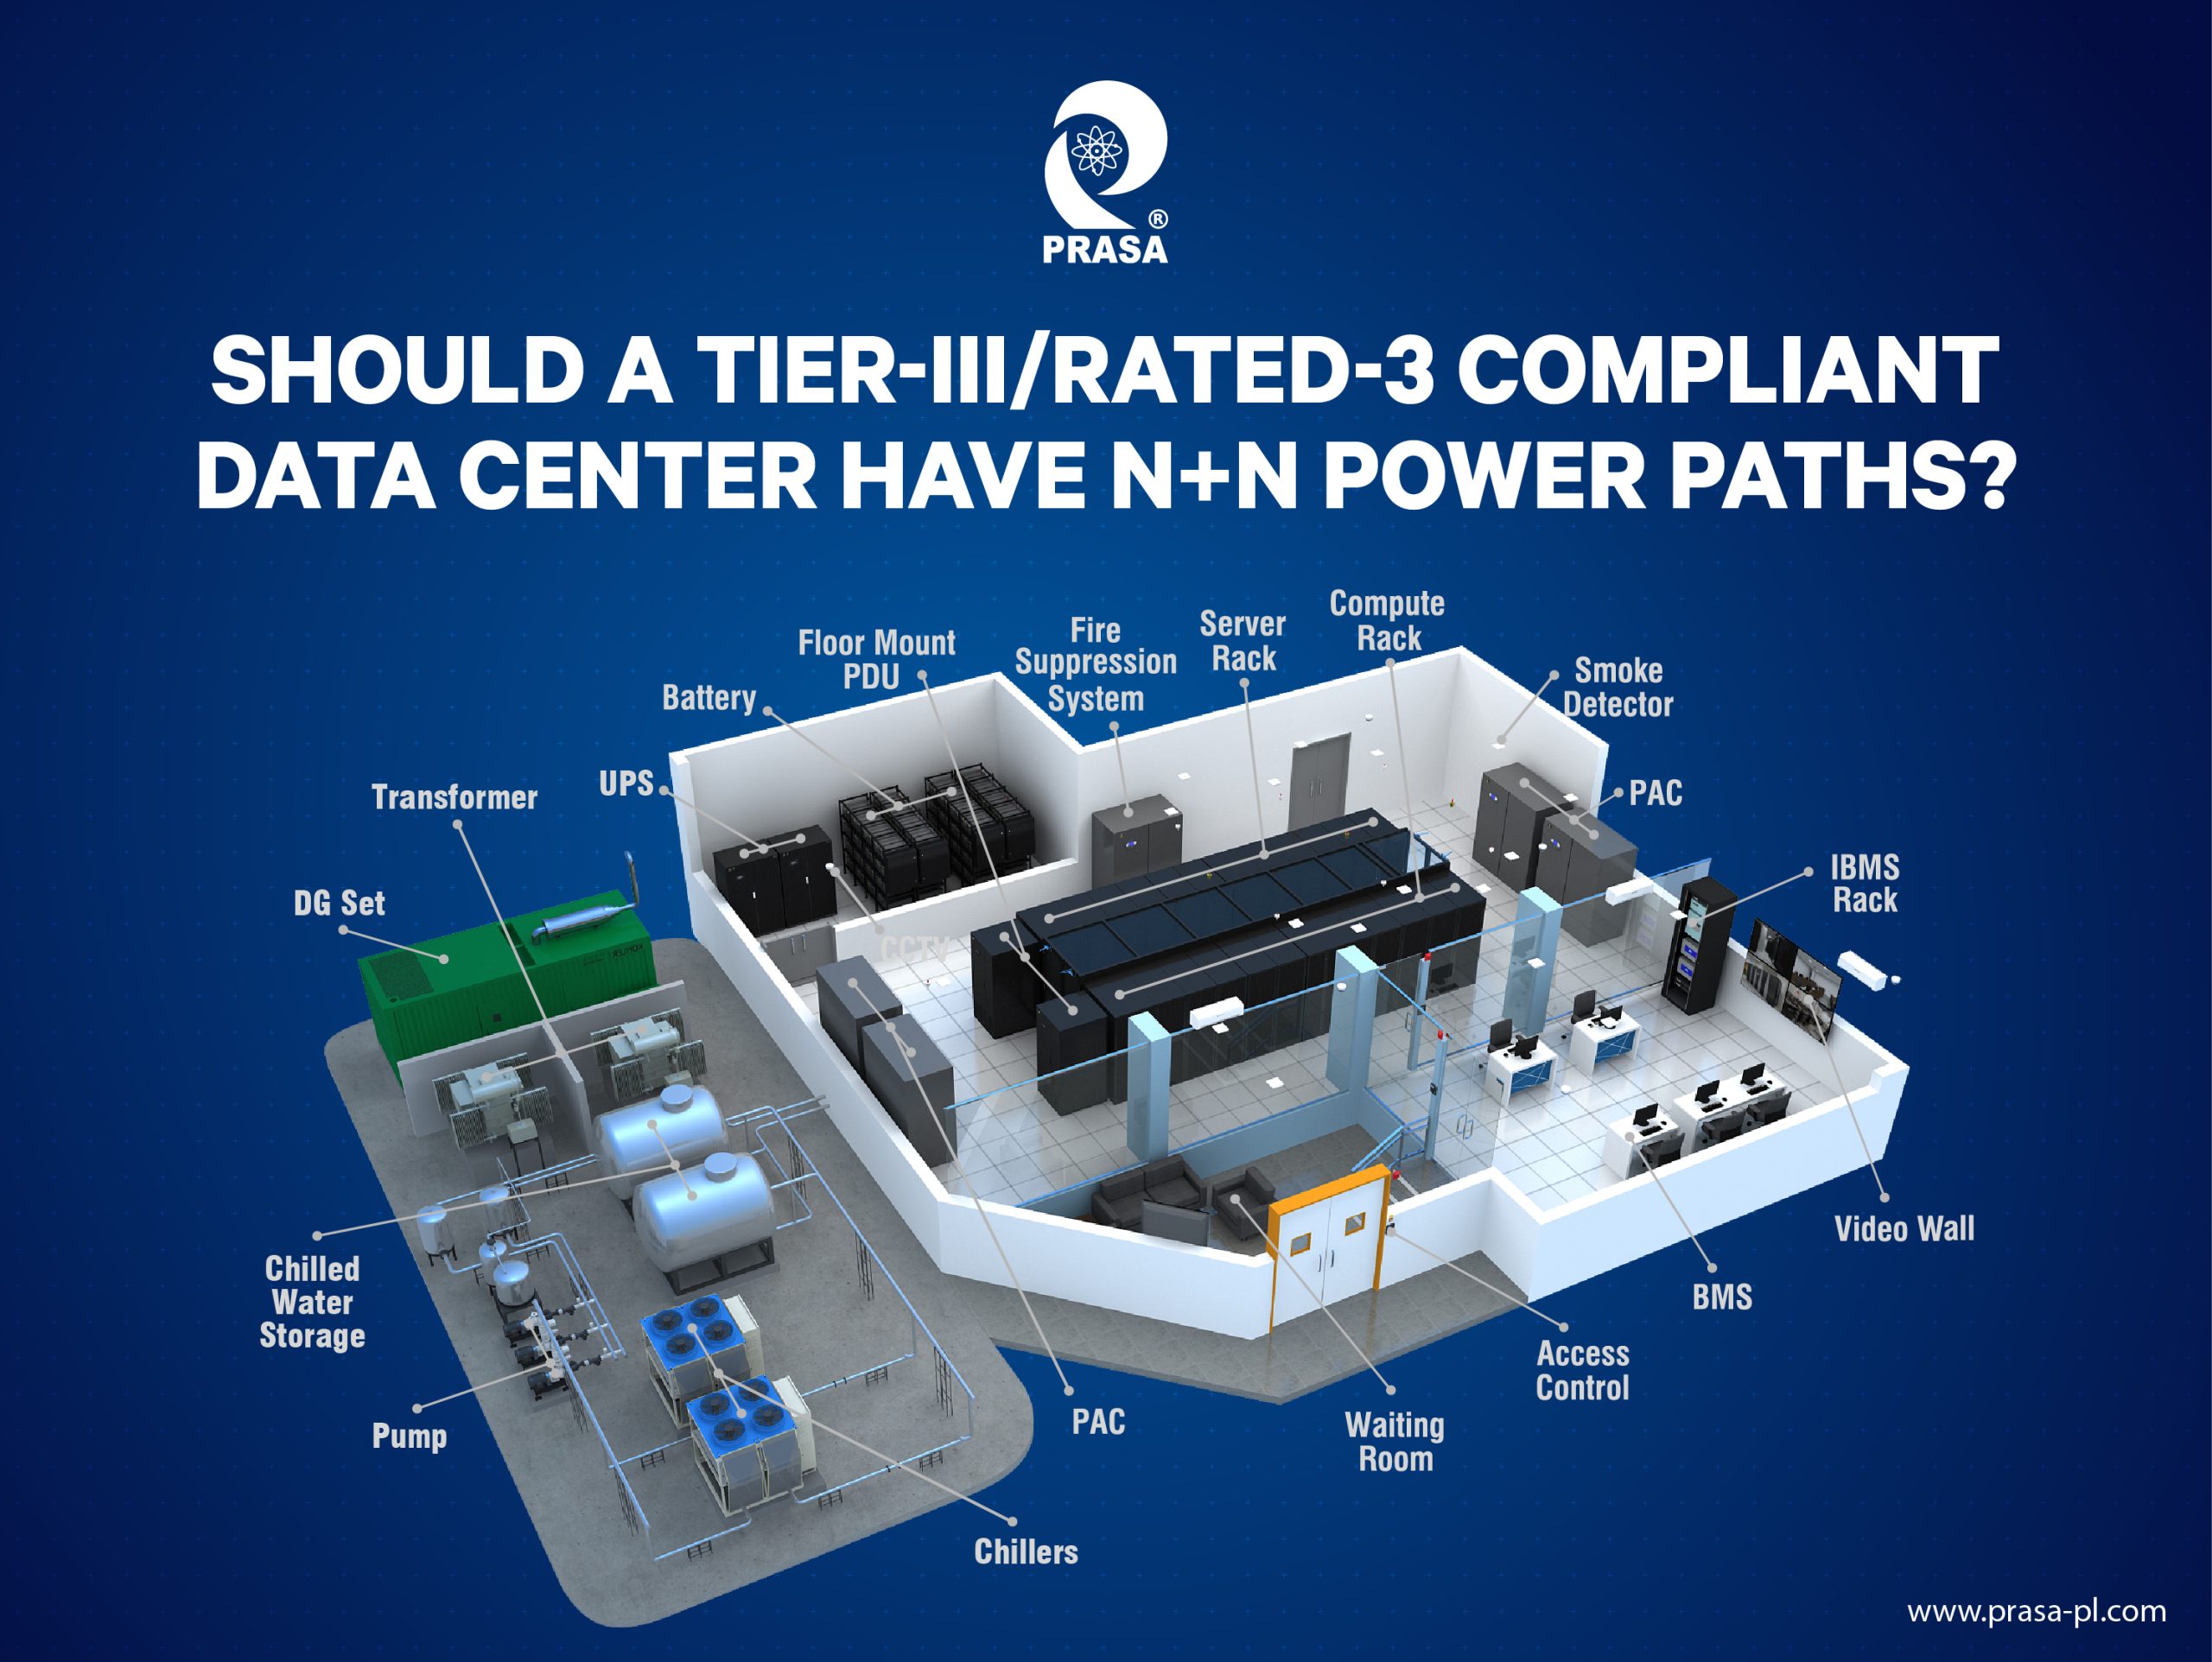 <strong>Should a Tier-III/Rated-3 compliant Data Center have N+N Power Paths?</strong>